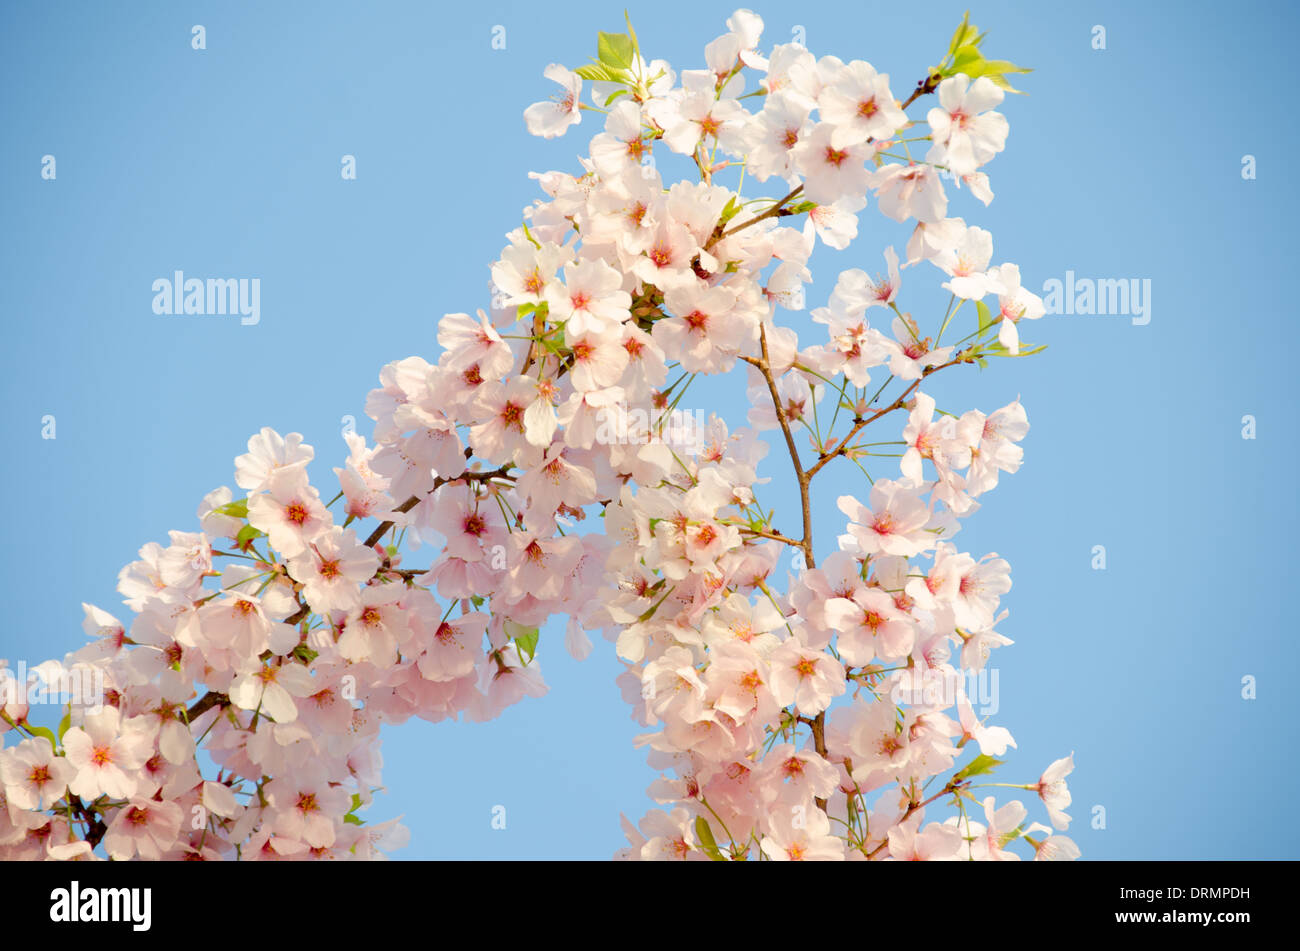 WASHINGTON DC, USA - A close-up of some of the flowers of Washington's famous cherry blossoms in bloom. Stock Photo